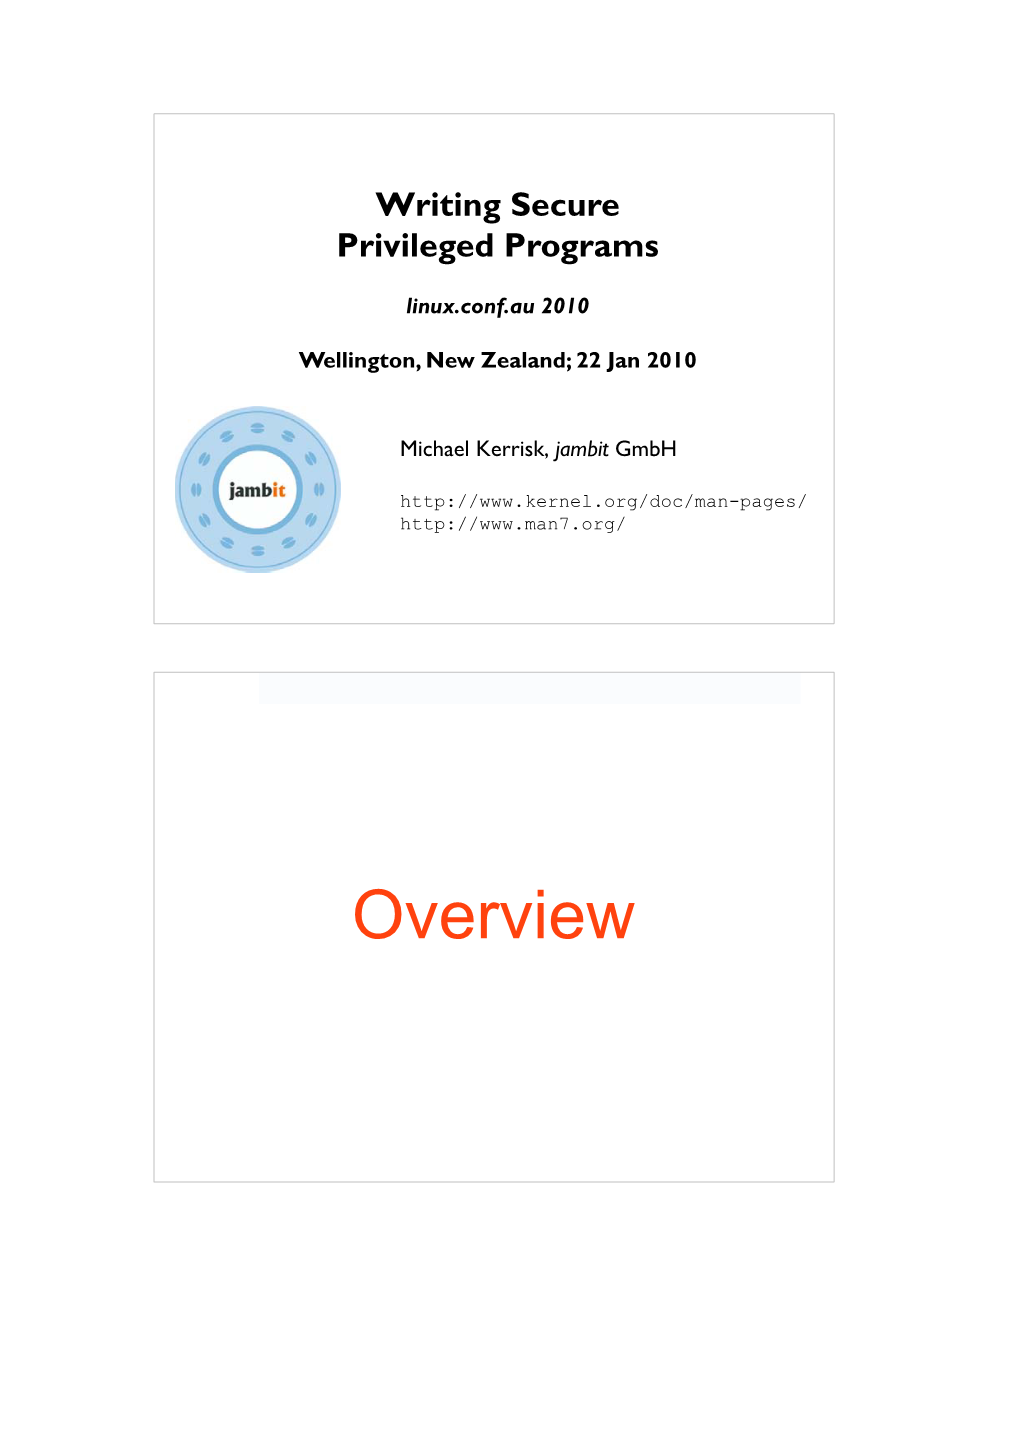 Writing Secure Privileged Programs